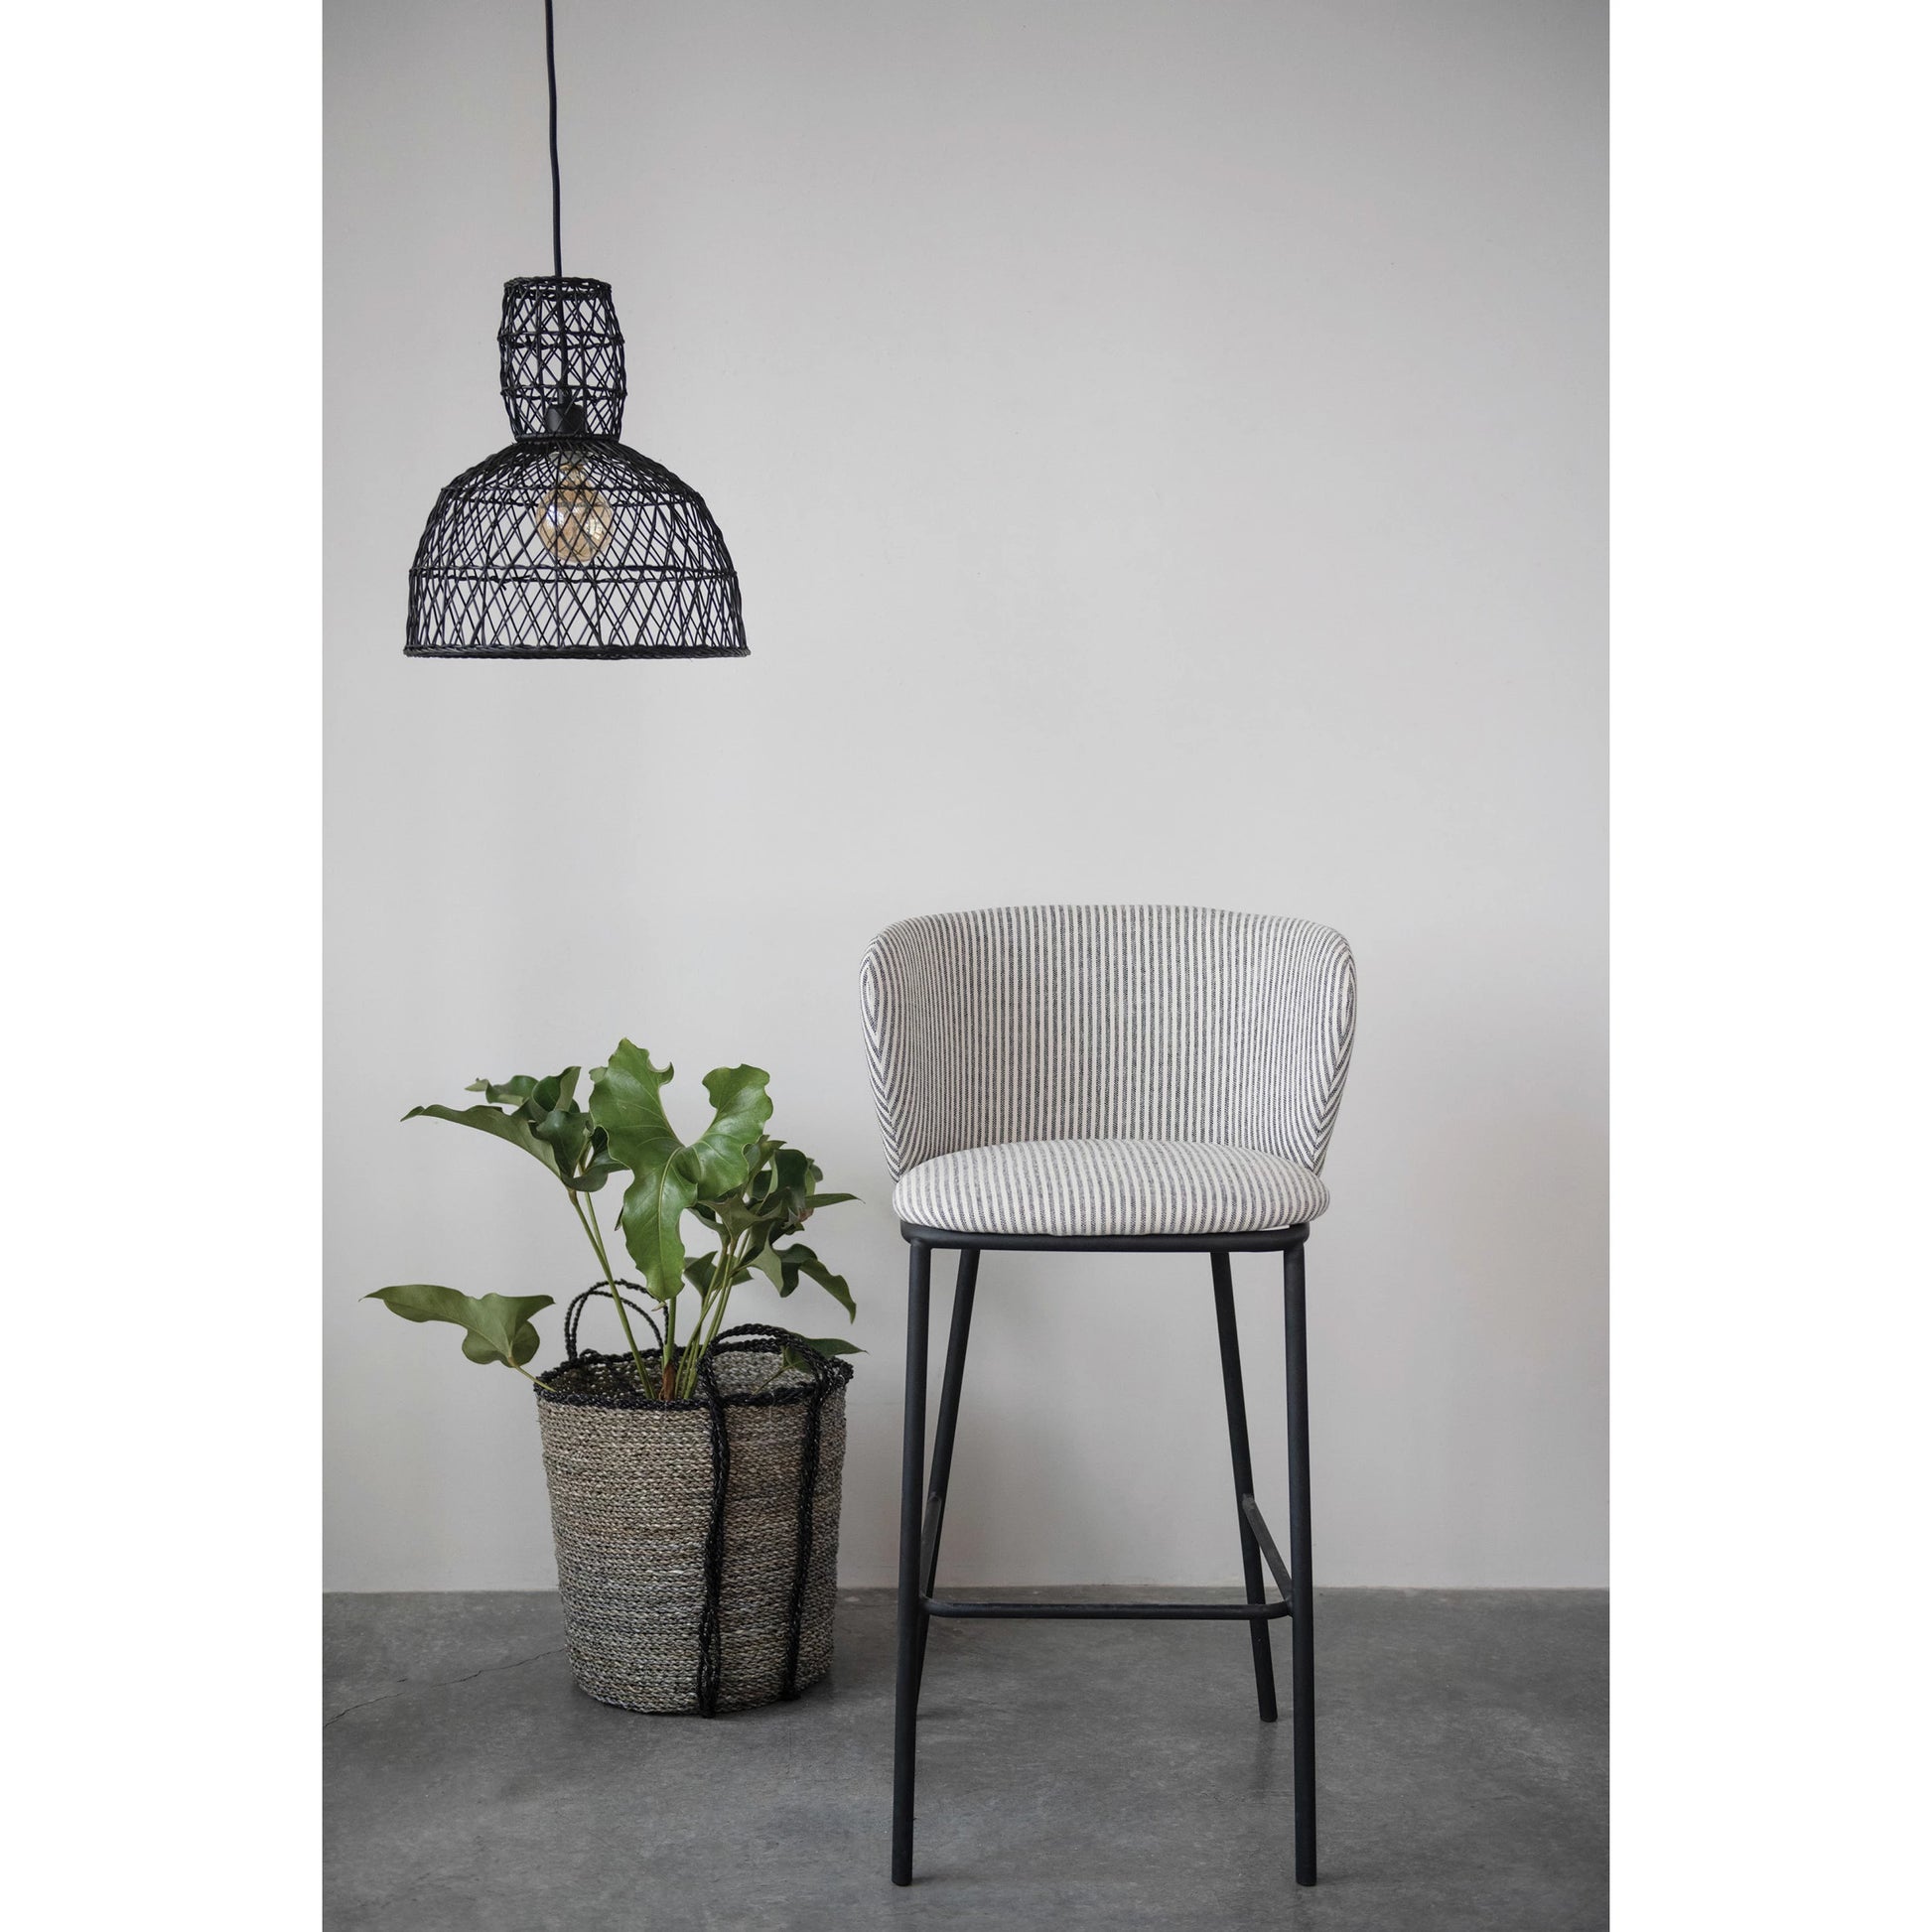 woven rattan and metal pendant lamp hanging above a chair beside a basket with a tall plant inside against a light gray wall